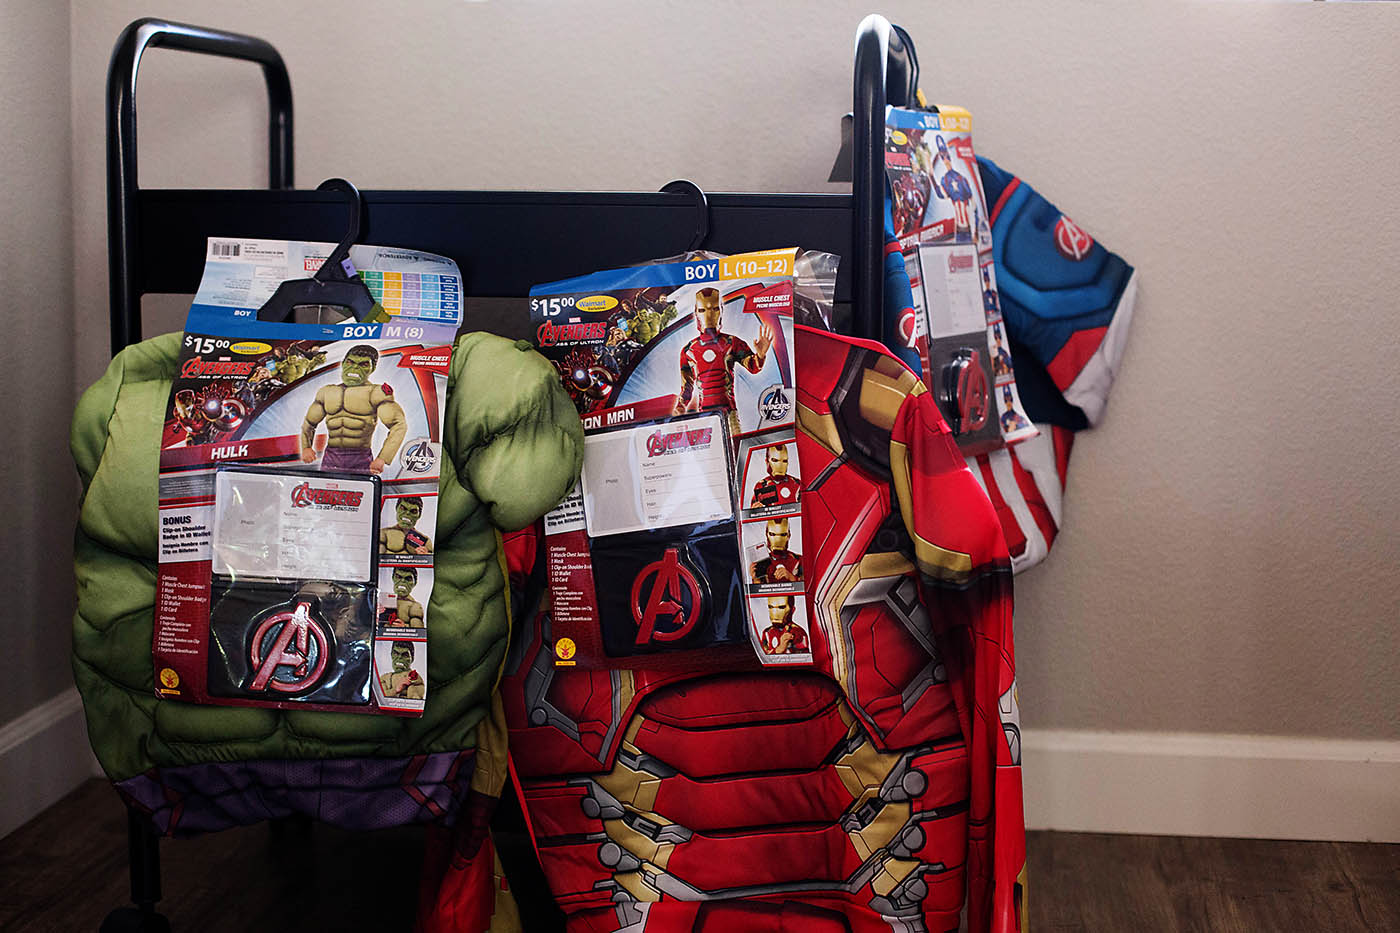 MARVEL's The Avengers: Age of Ultron movie night watch party including a hero transformation dress up center and free movie night printable!